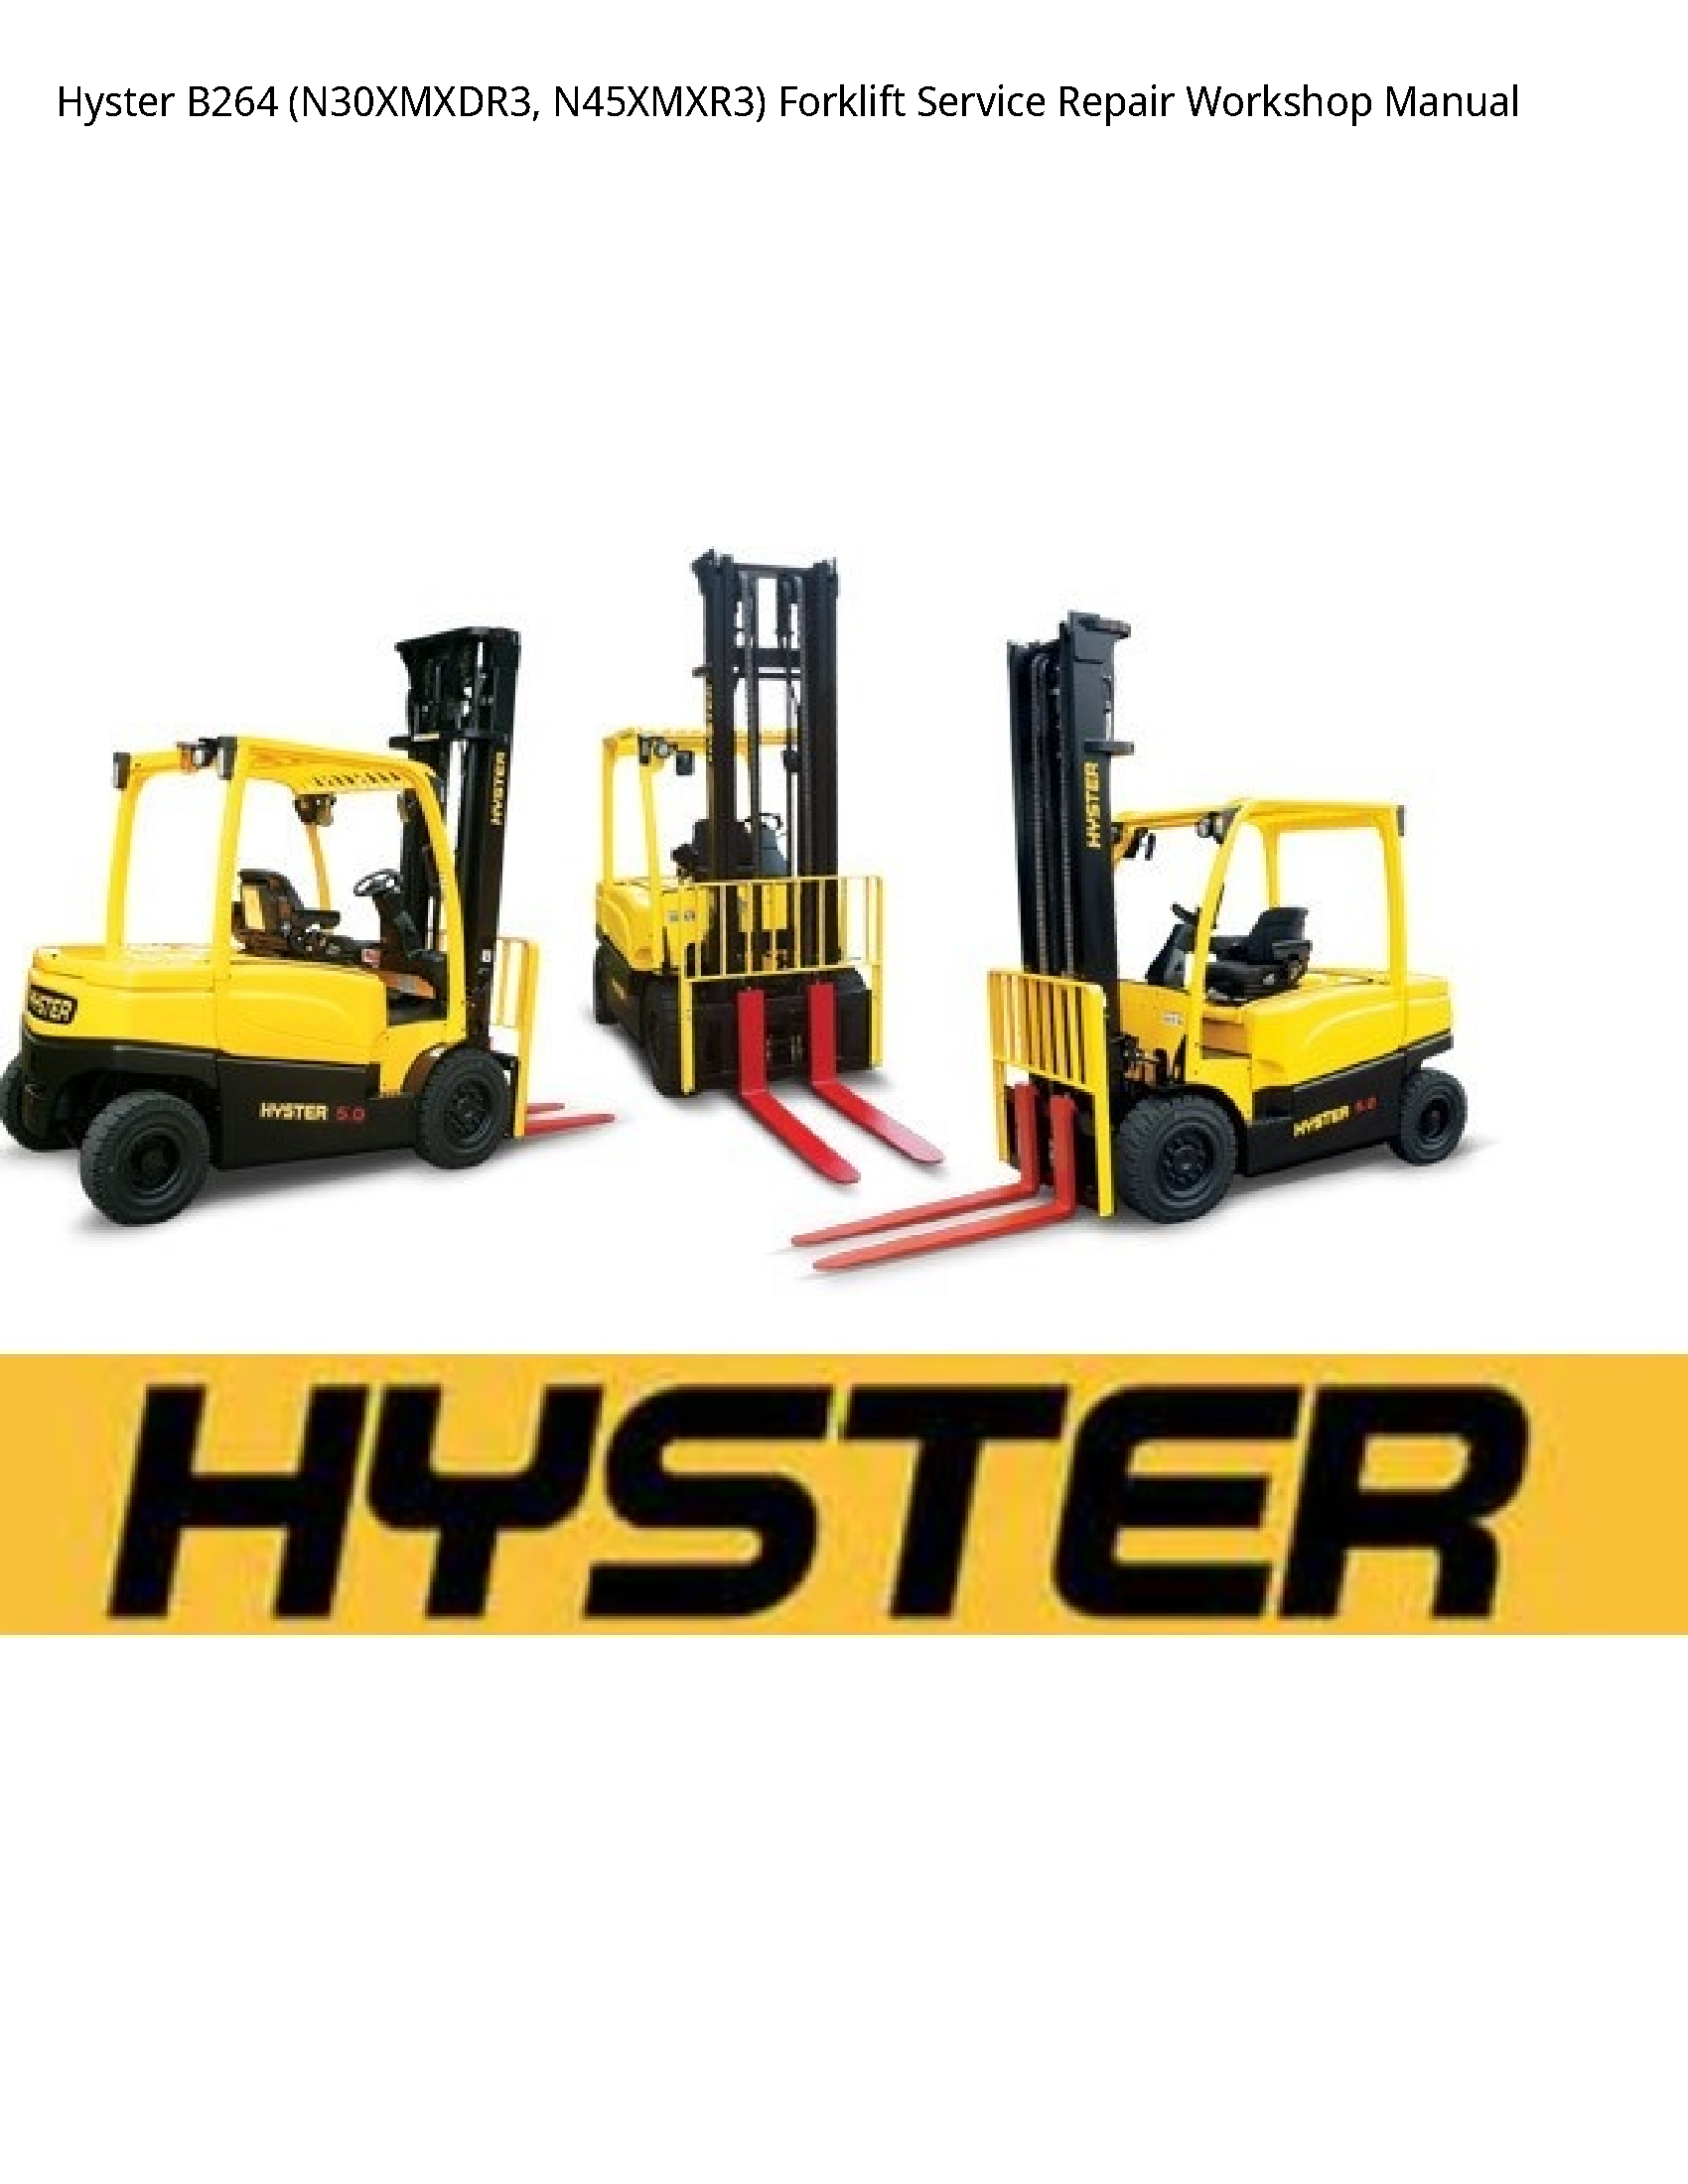 Hyster B264 Forklift manual